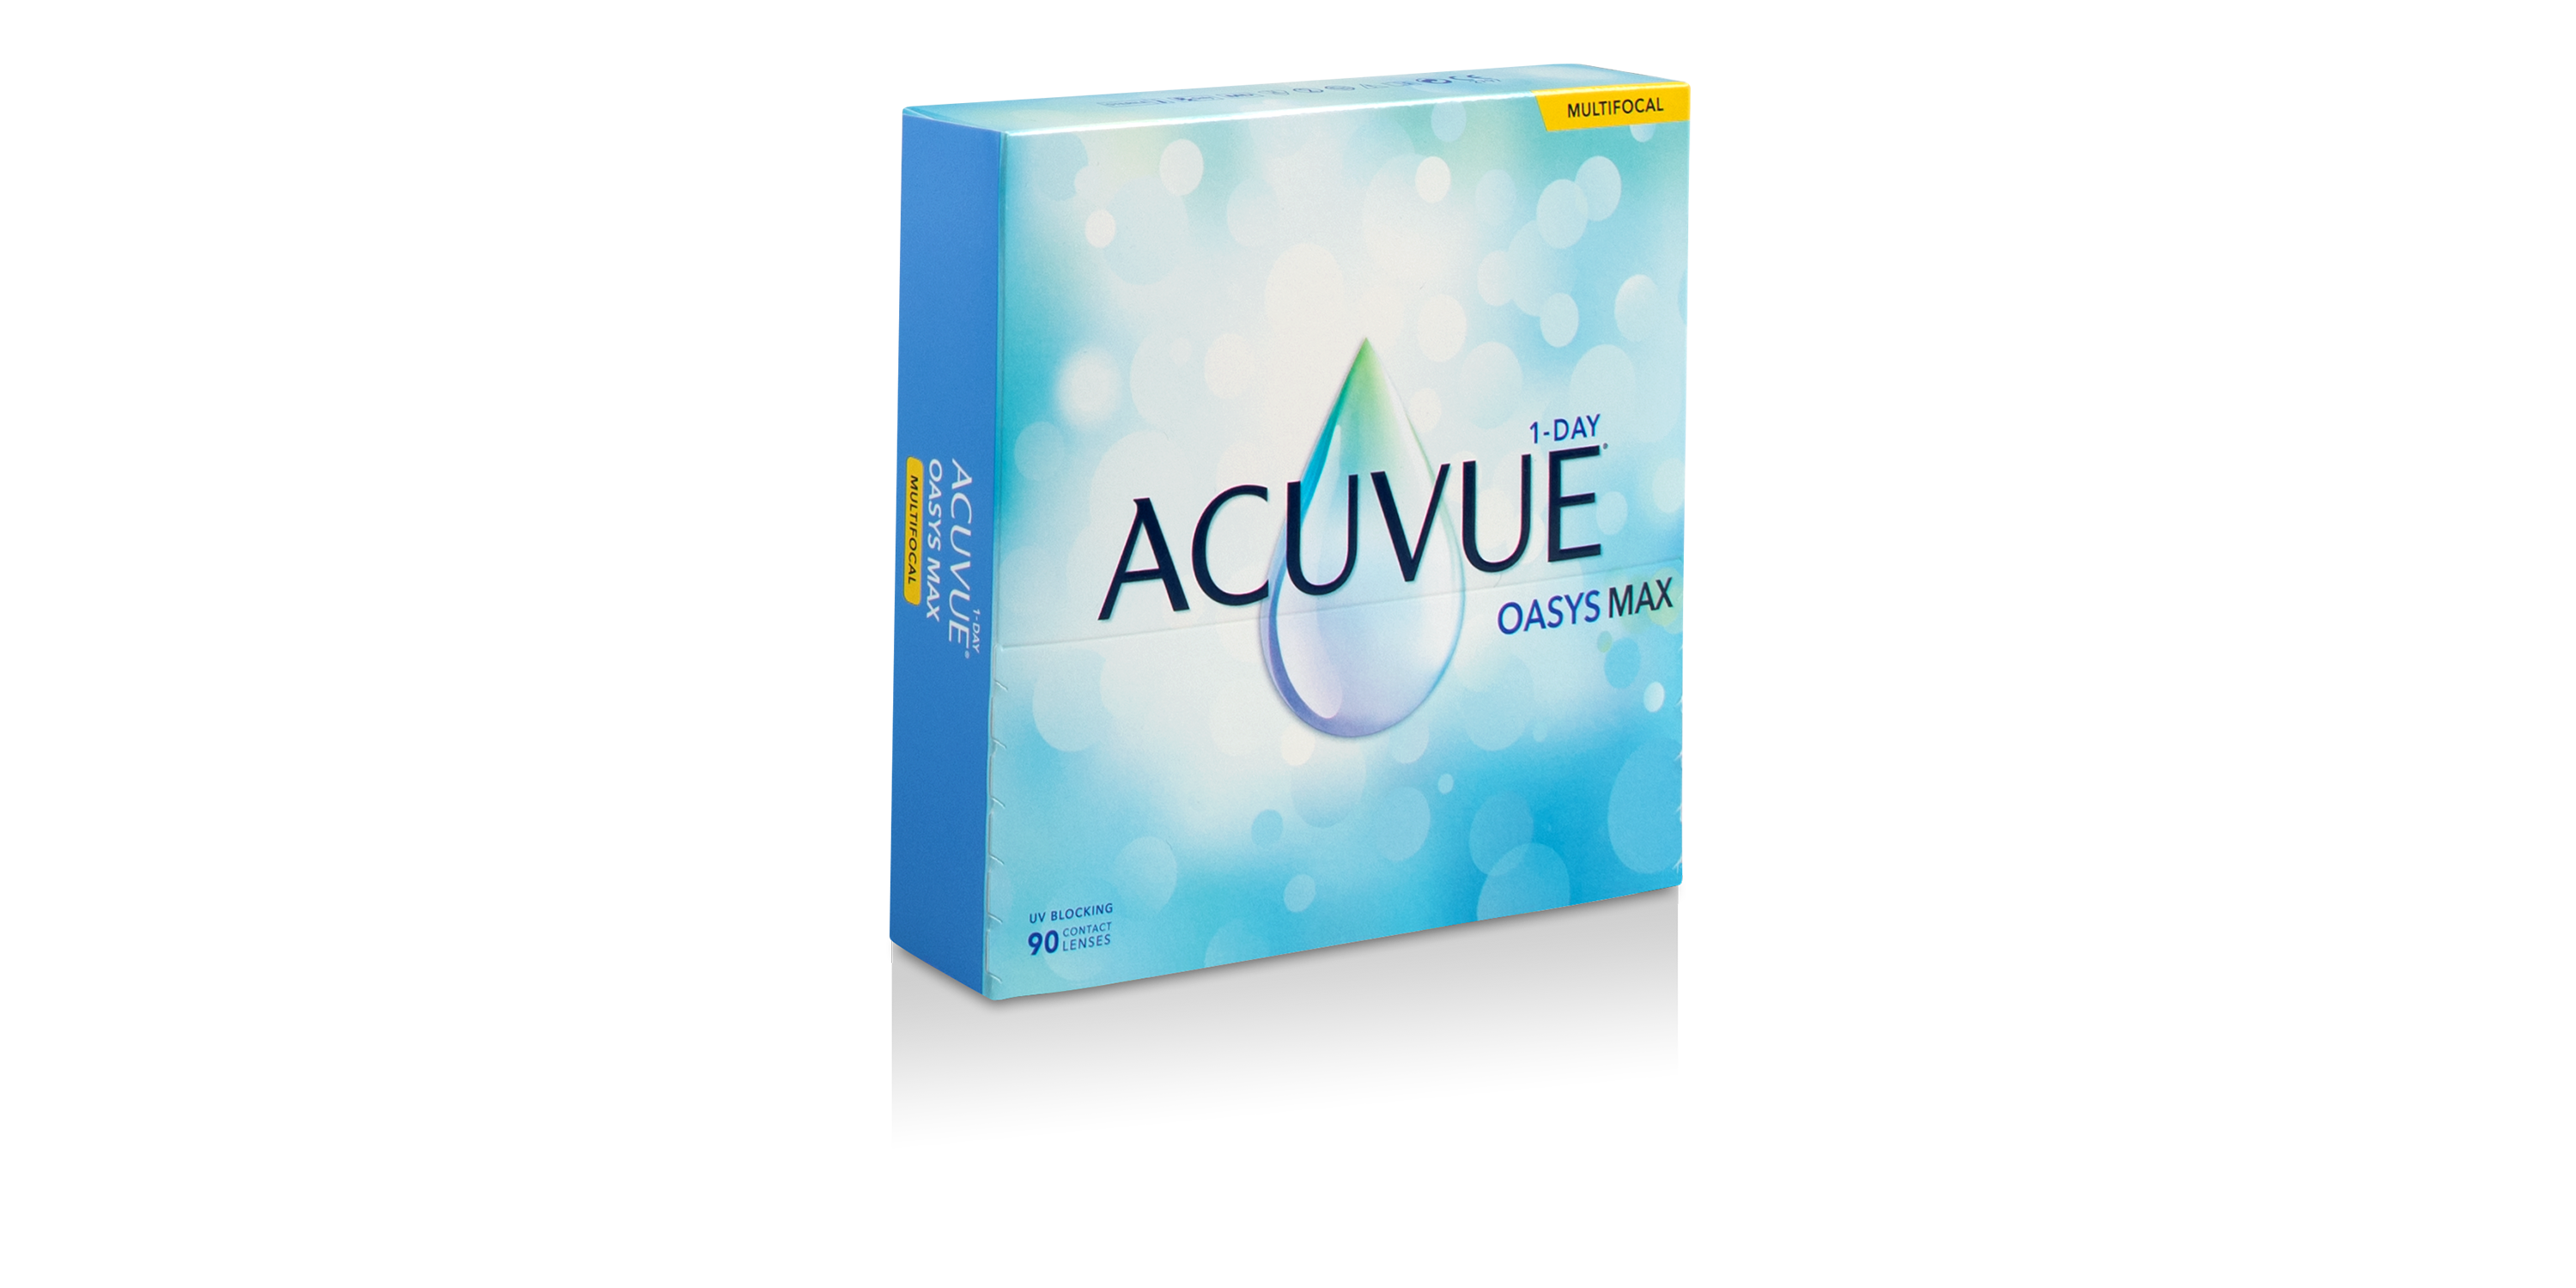 ACUVUE® OASYS MAX 1-Day Multifocal, 90 pack